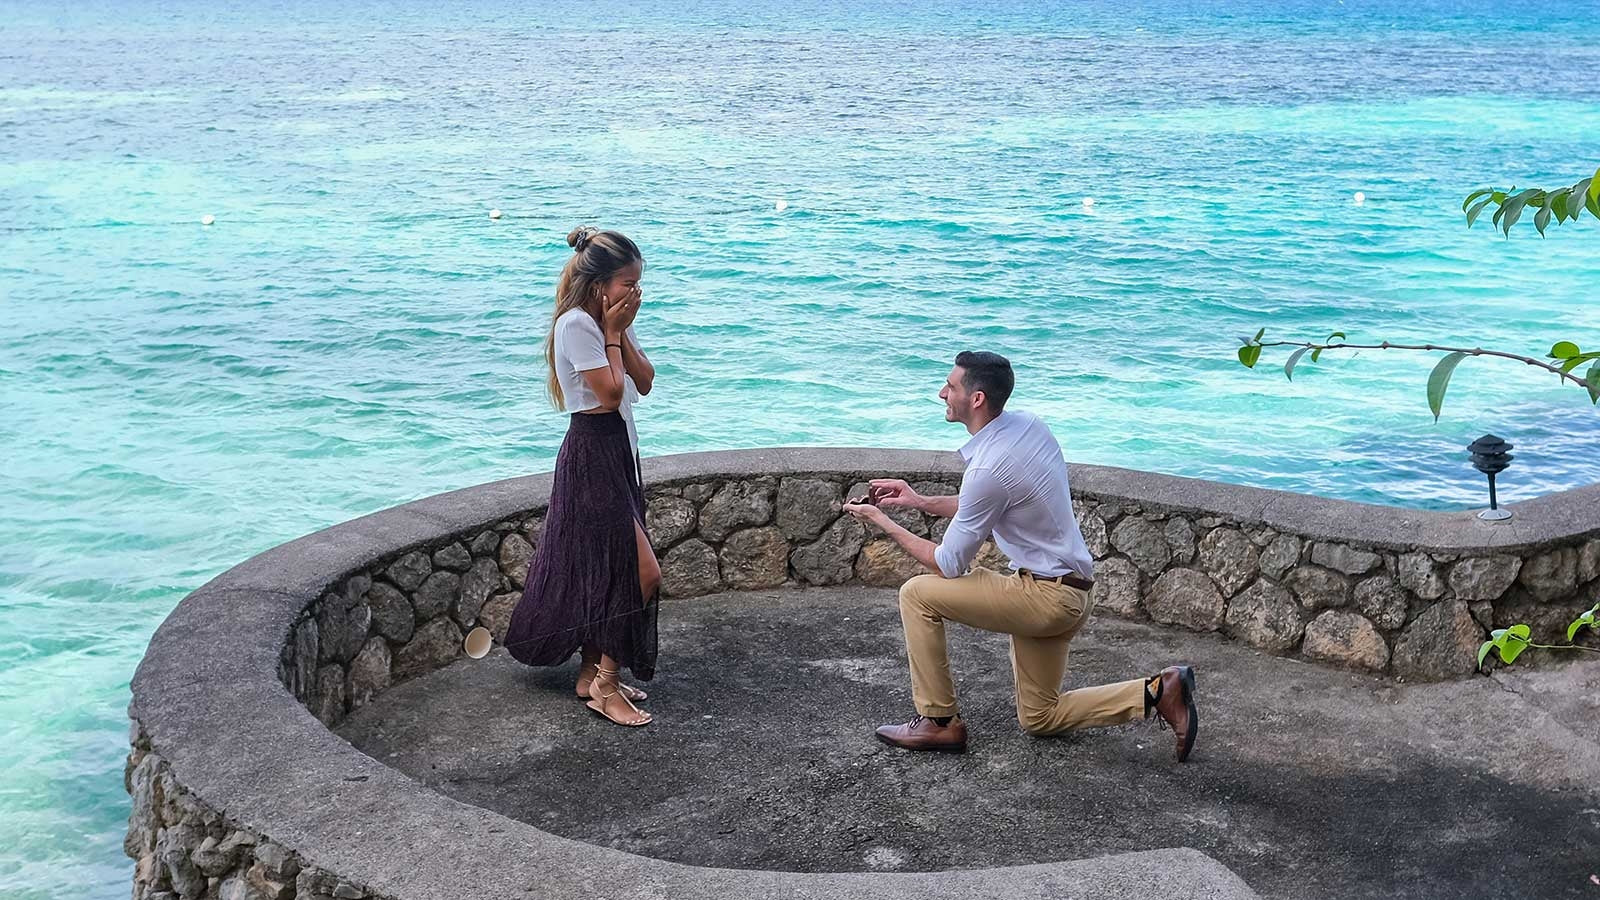 A fateful high school encounter led our newest couple from cotton socks to a Devam ring!